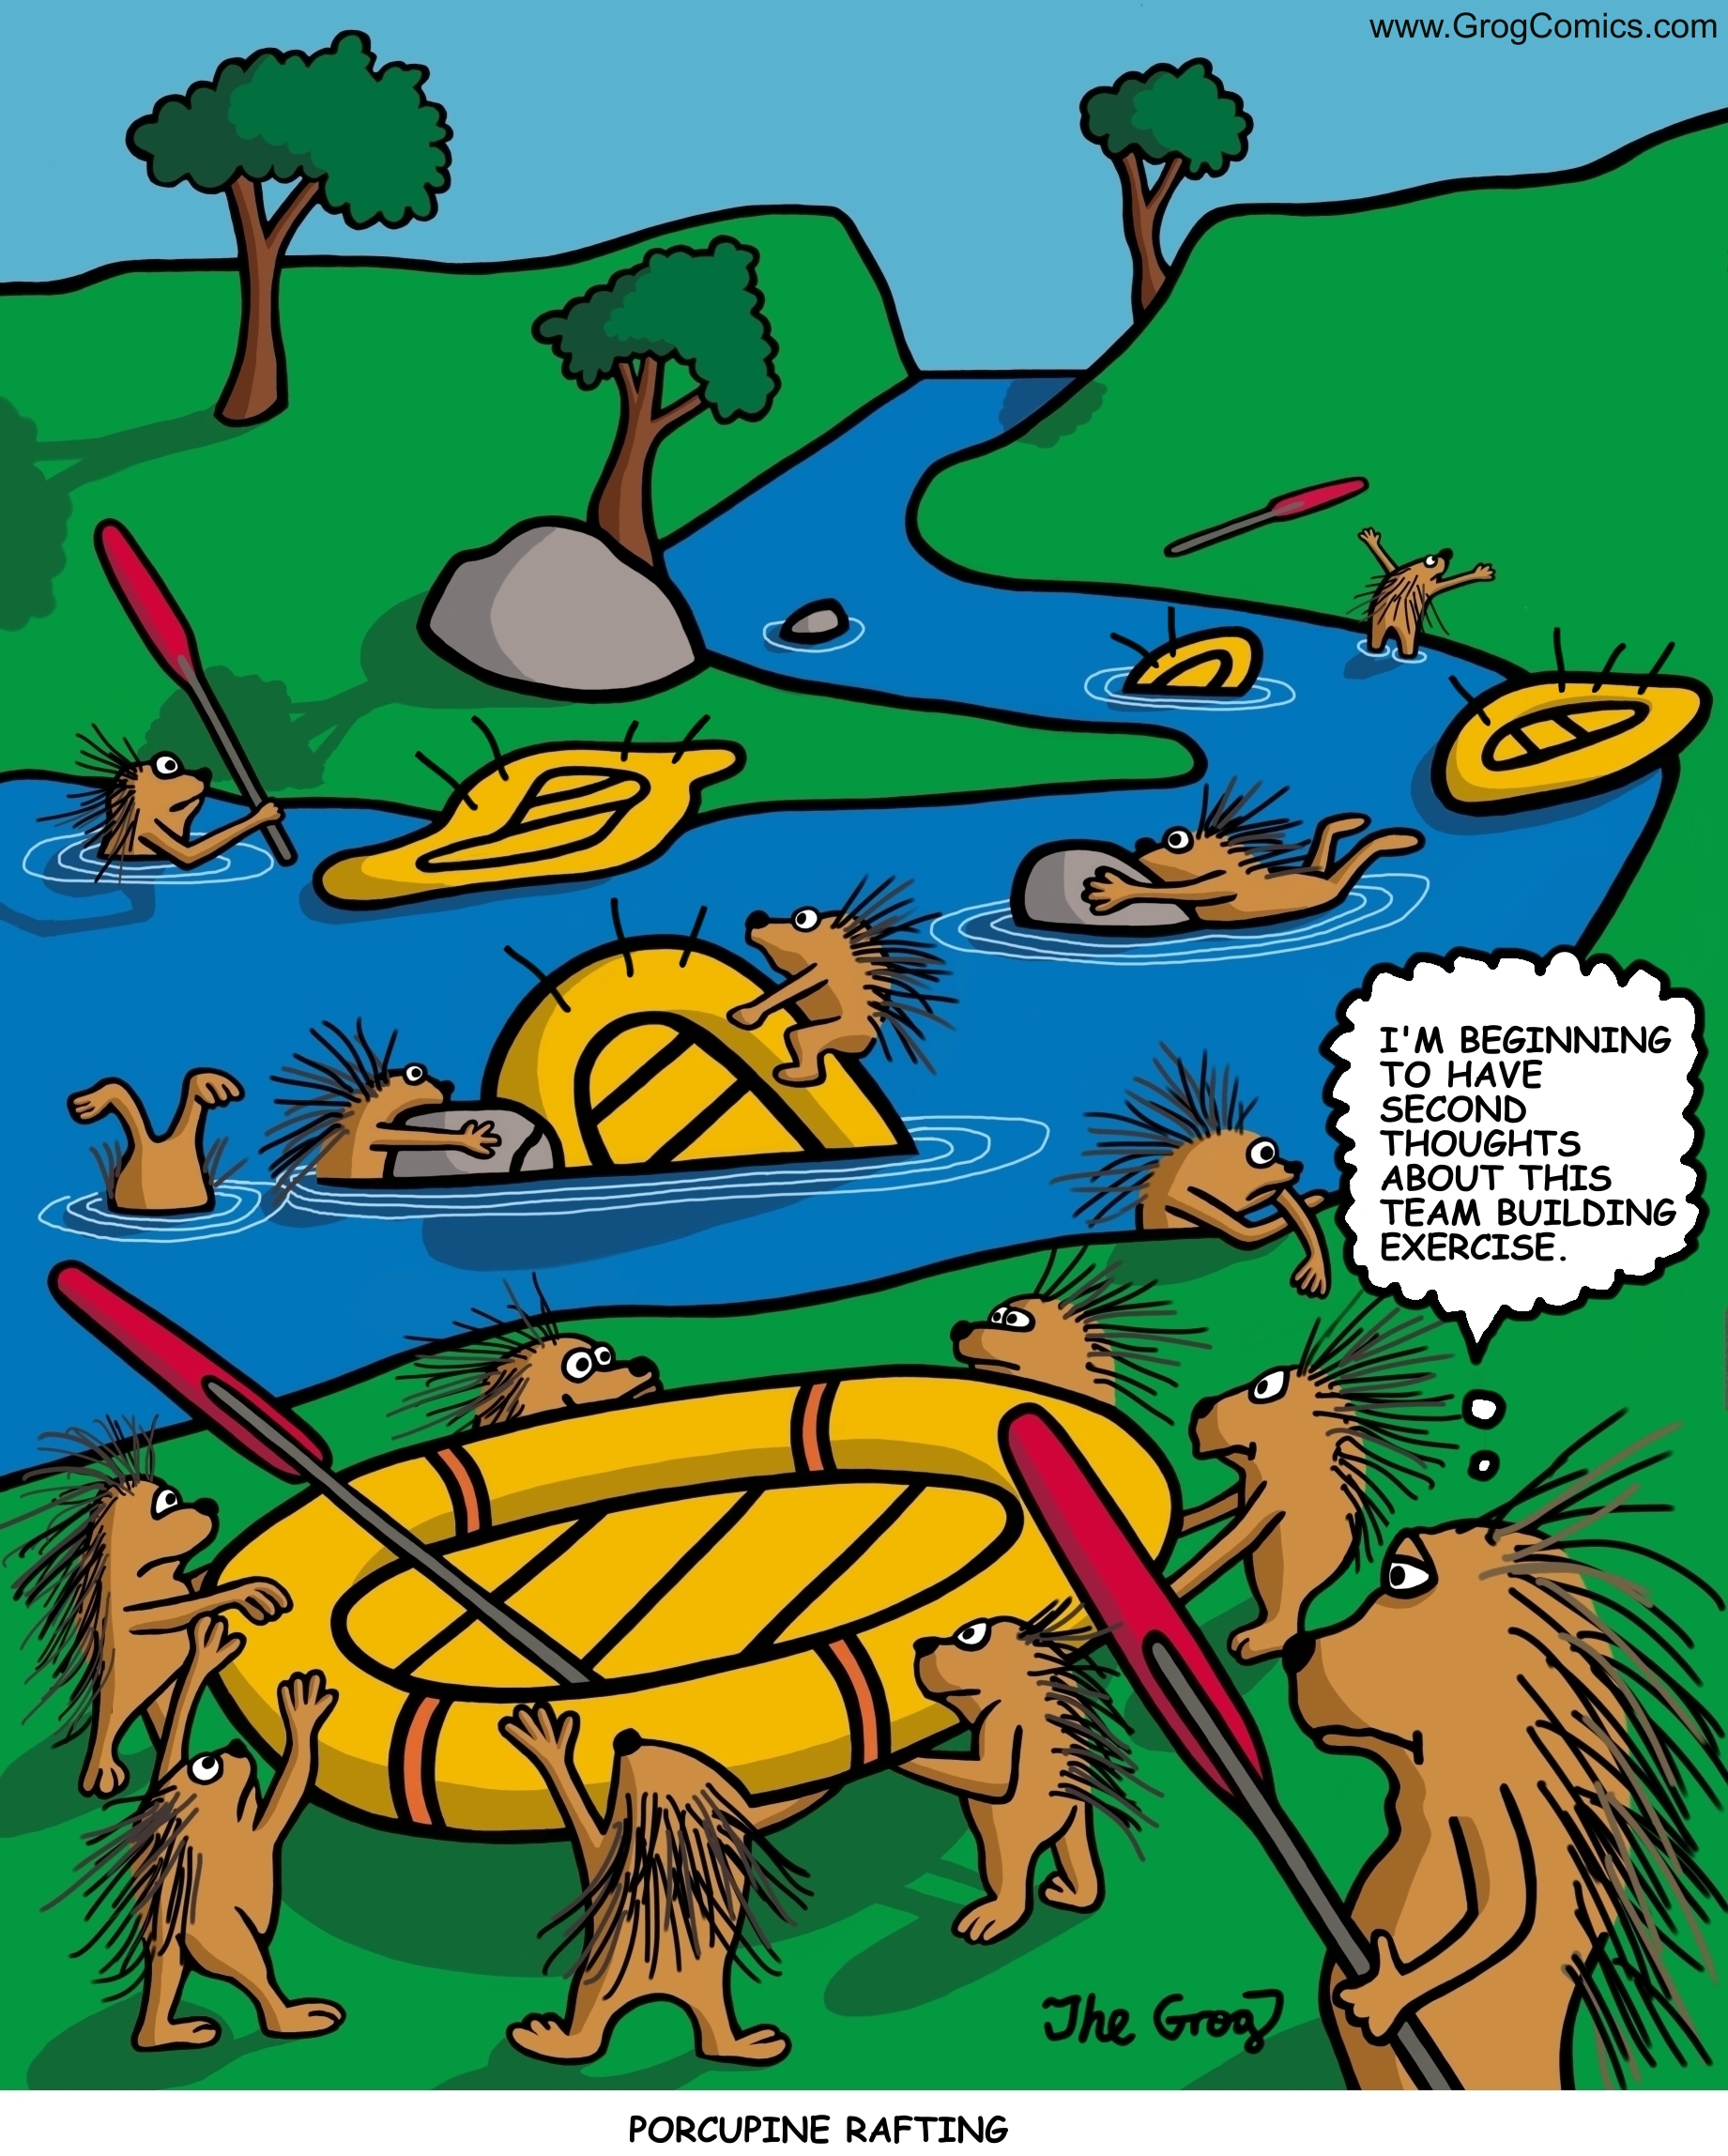 A group of porcupines decides to go river rafting. For obvious reasons, the rafts deflate, sending the porcupines into the water. One porcupine surveys the scene and says, “I’m beginning to have second thoughts about this team building exercise.”